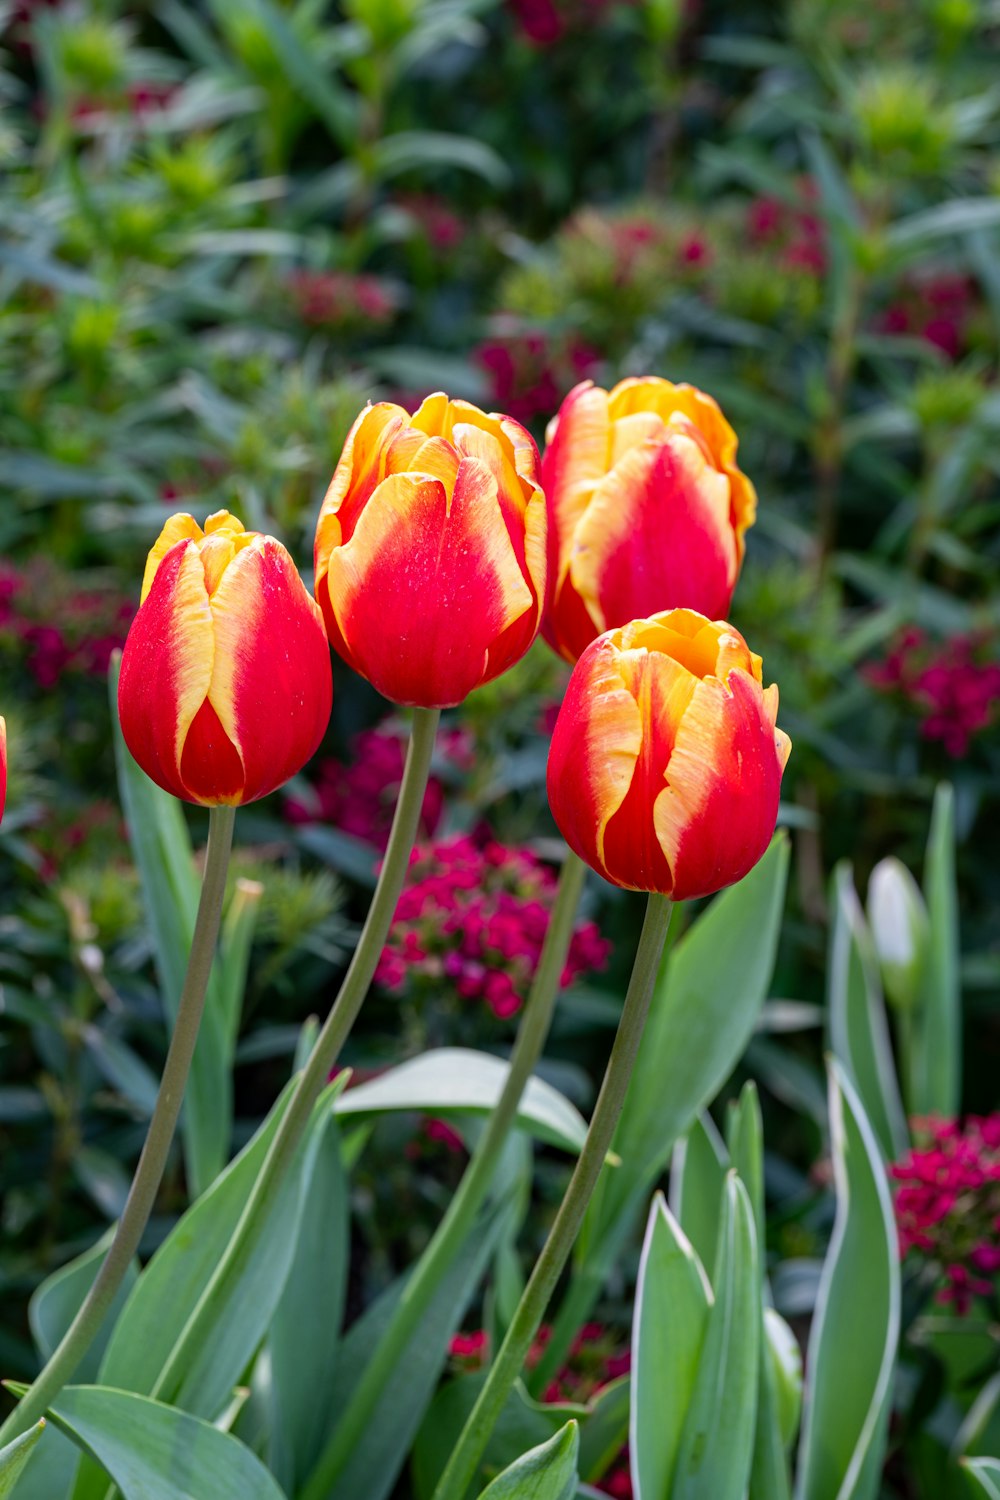 a group of red and yellow tulips in a garden